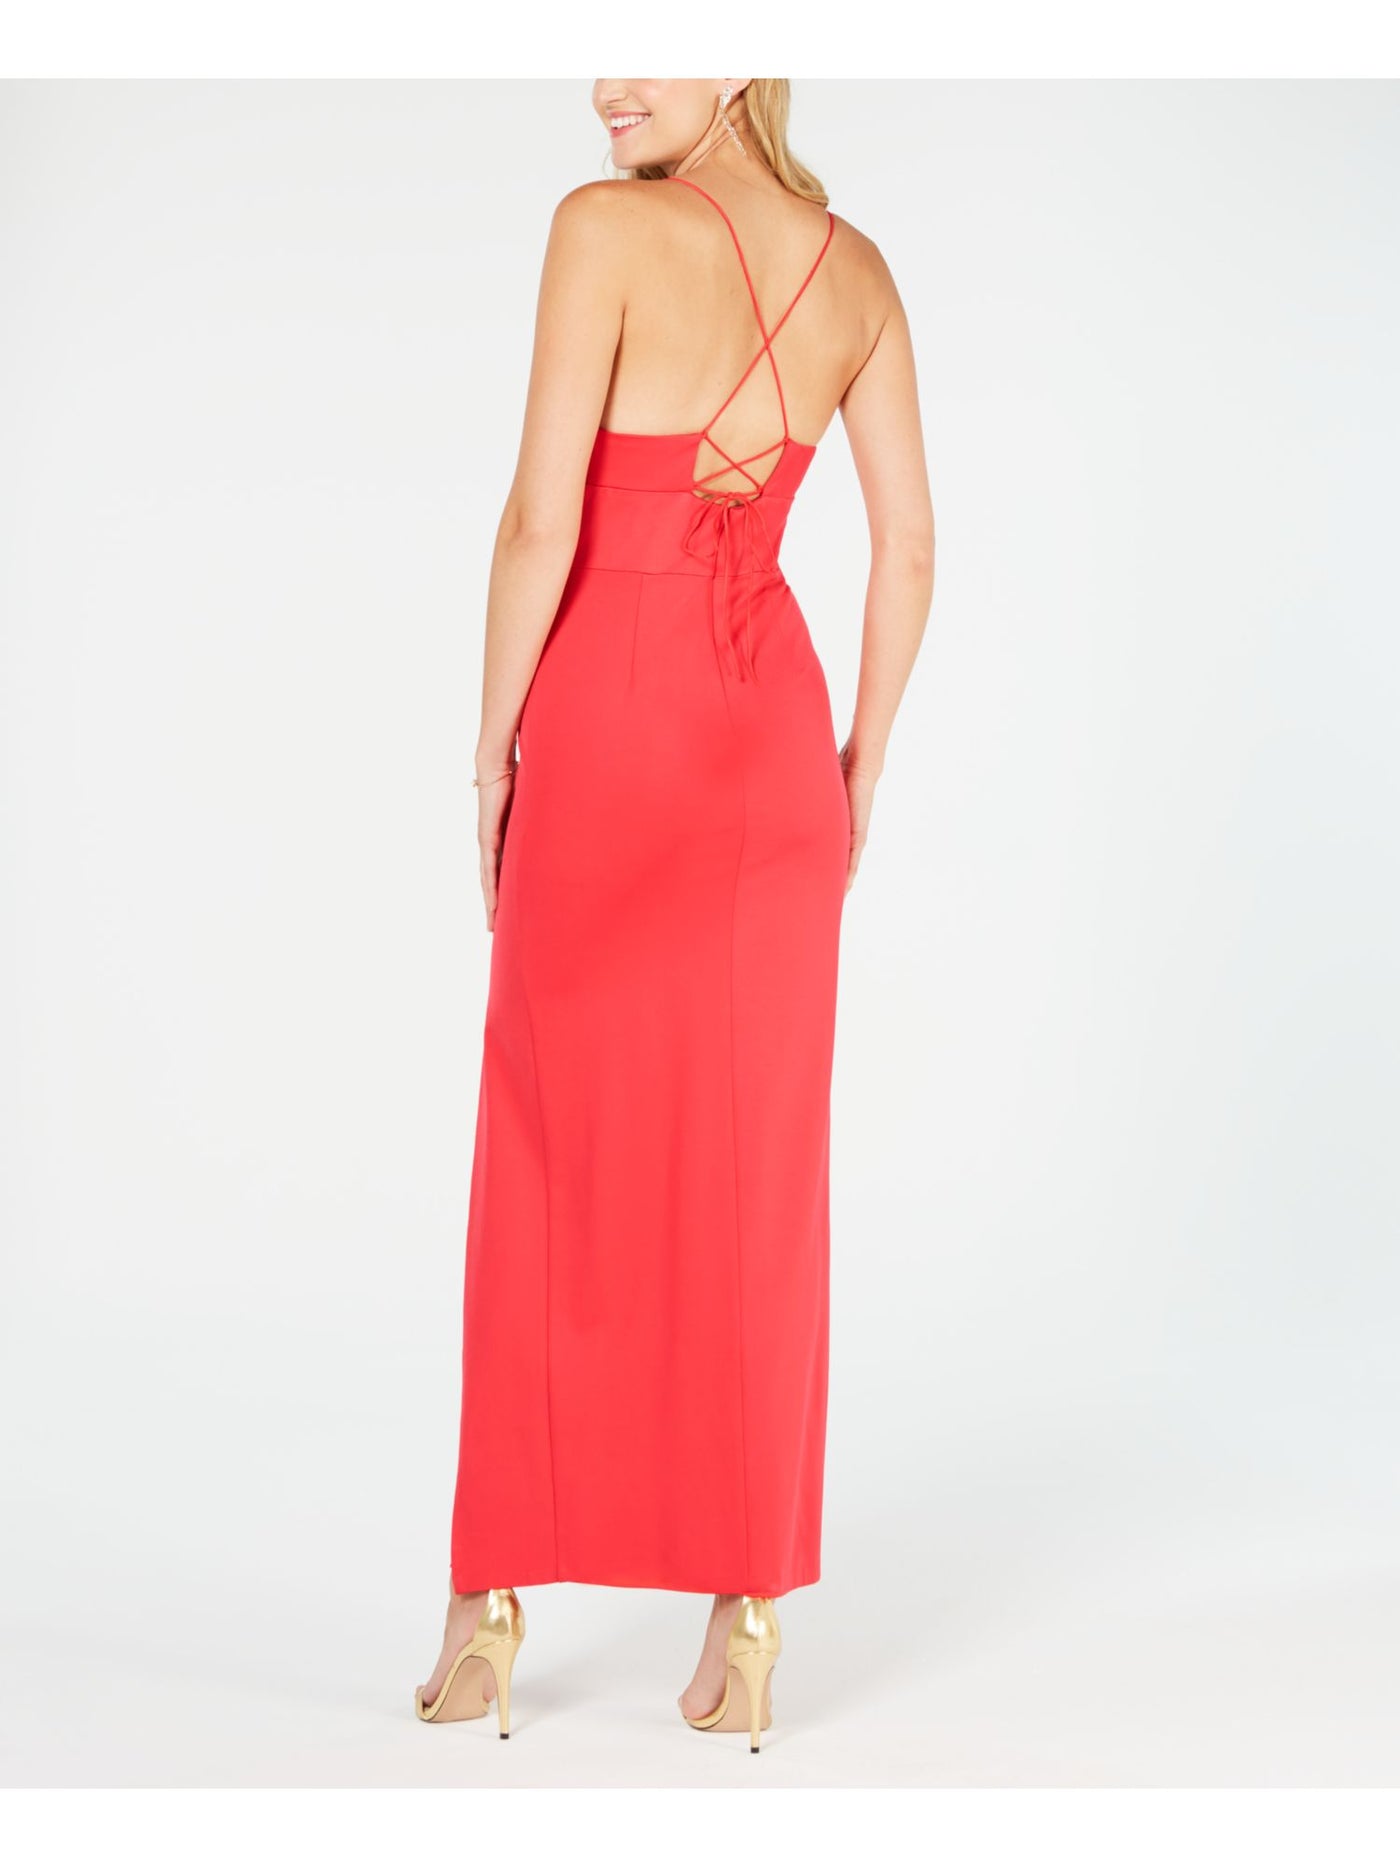 ADRIANNA PAPELL Womens Red Slitted Spaghetti Strap V Neck Maxi Cocktail Sheath Dress 2